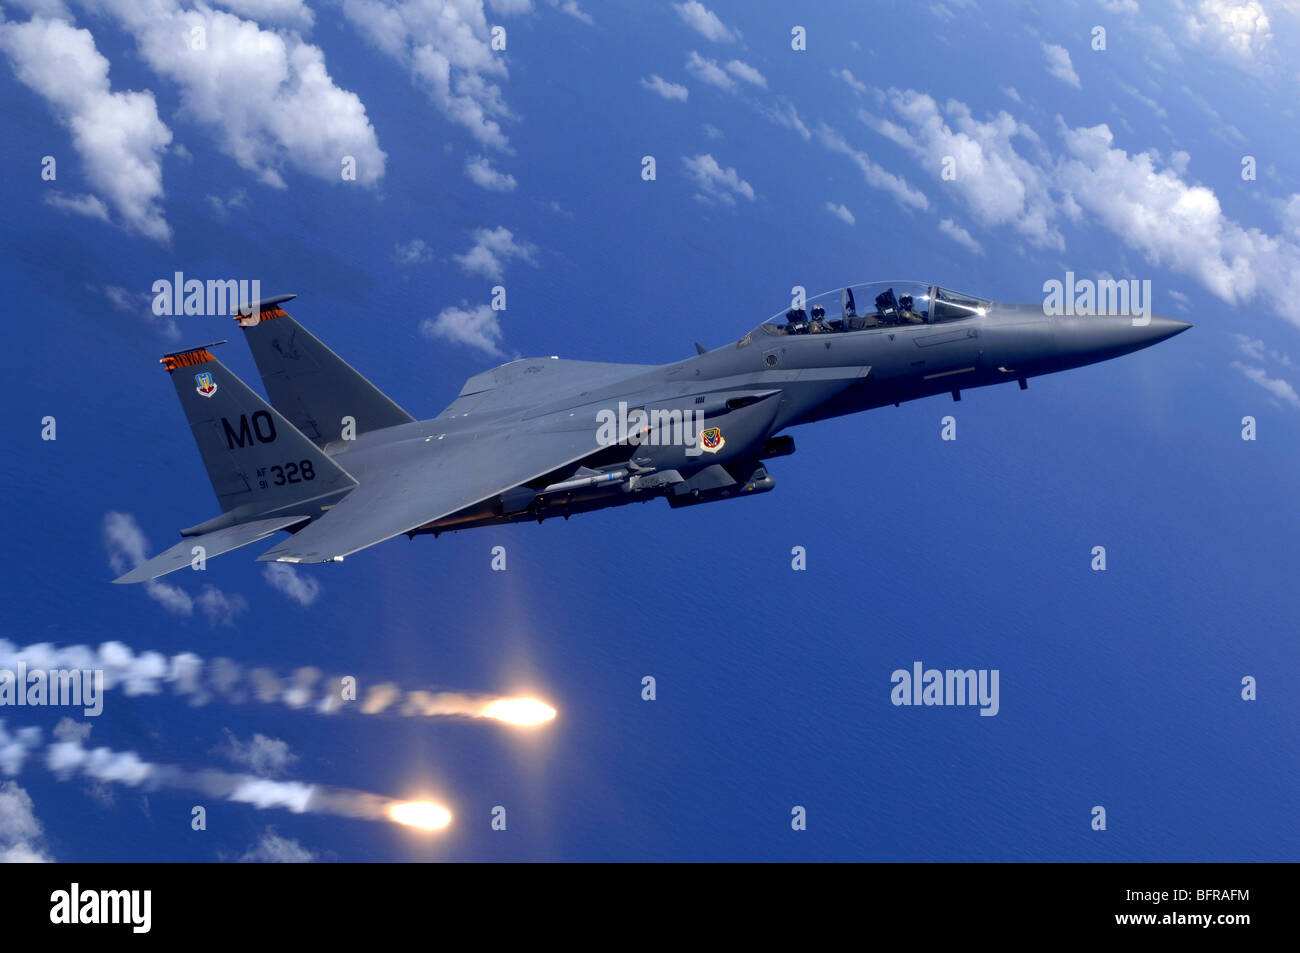 June 17, 2005 - An Air Force F-15E Strike Eagle fires flares during an aerial training dog fight off the coast of Guam. Stock Photo